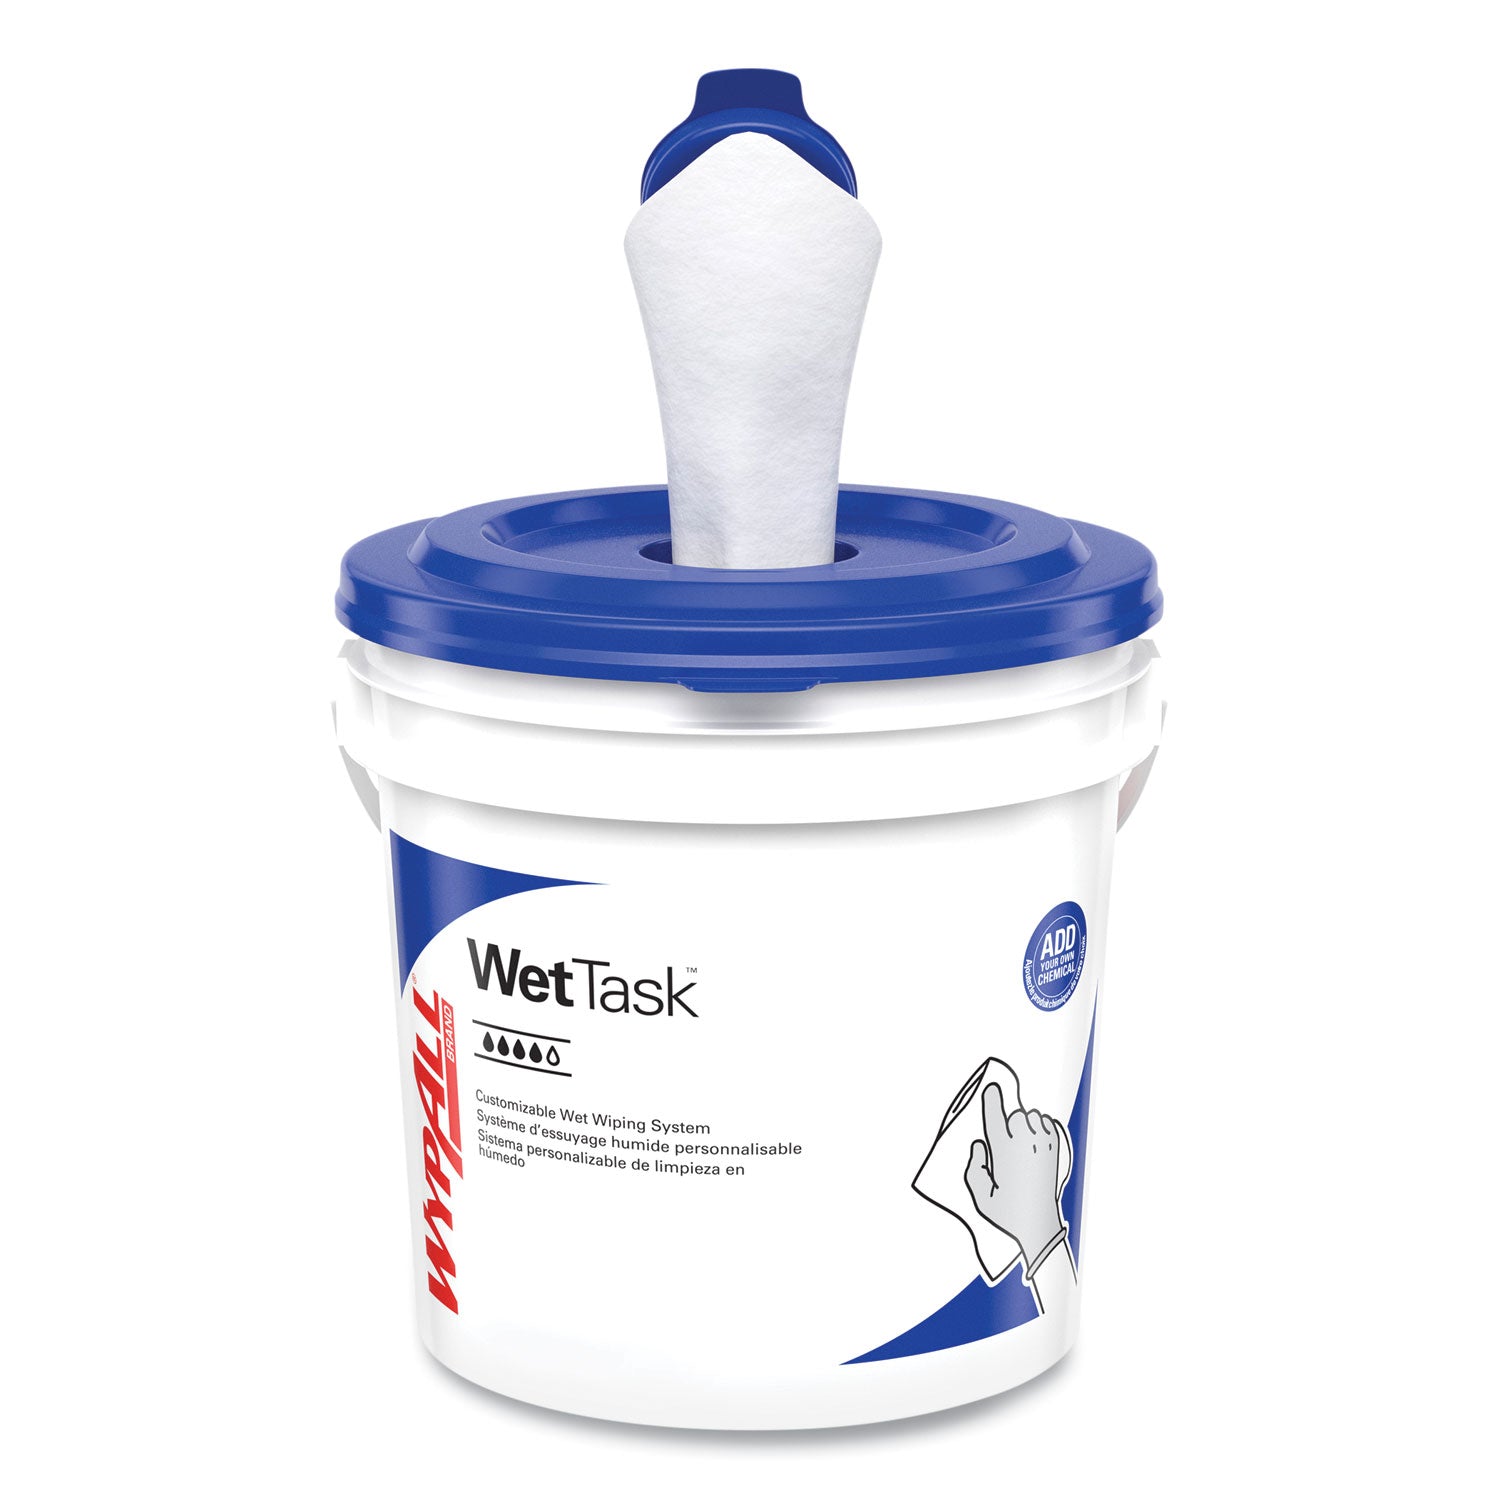 Critical Clean Wipers for Bleach, Disinfectants, Sanitizers WetTask Customizable Wet Wiping System, w/Bucket,140/Roll, 6/CT - 